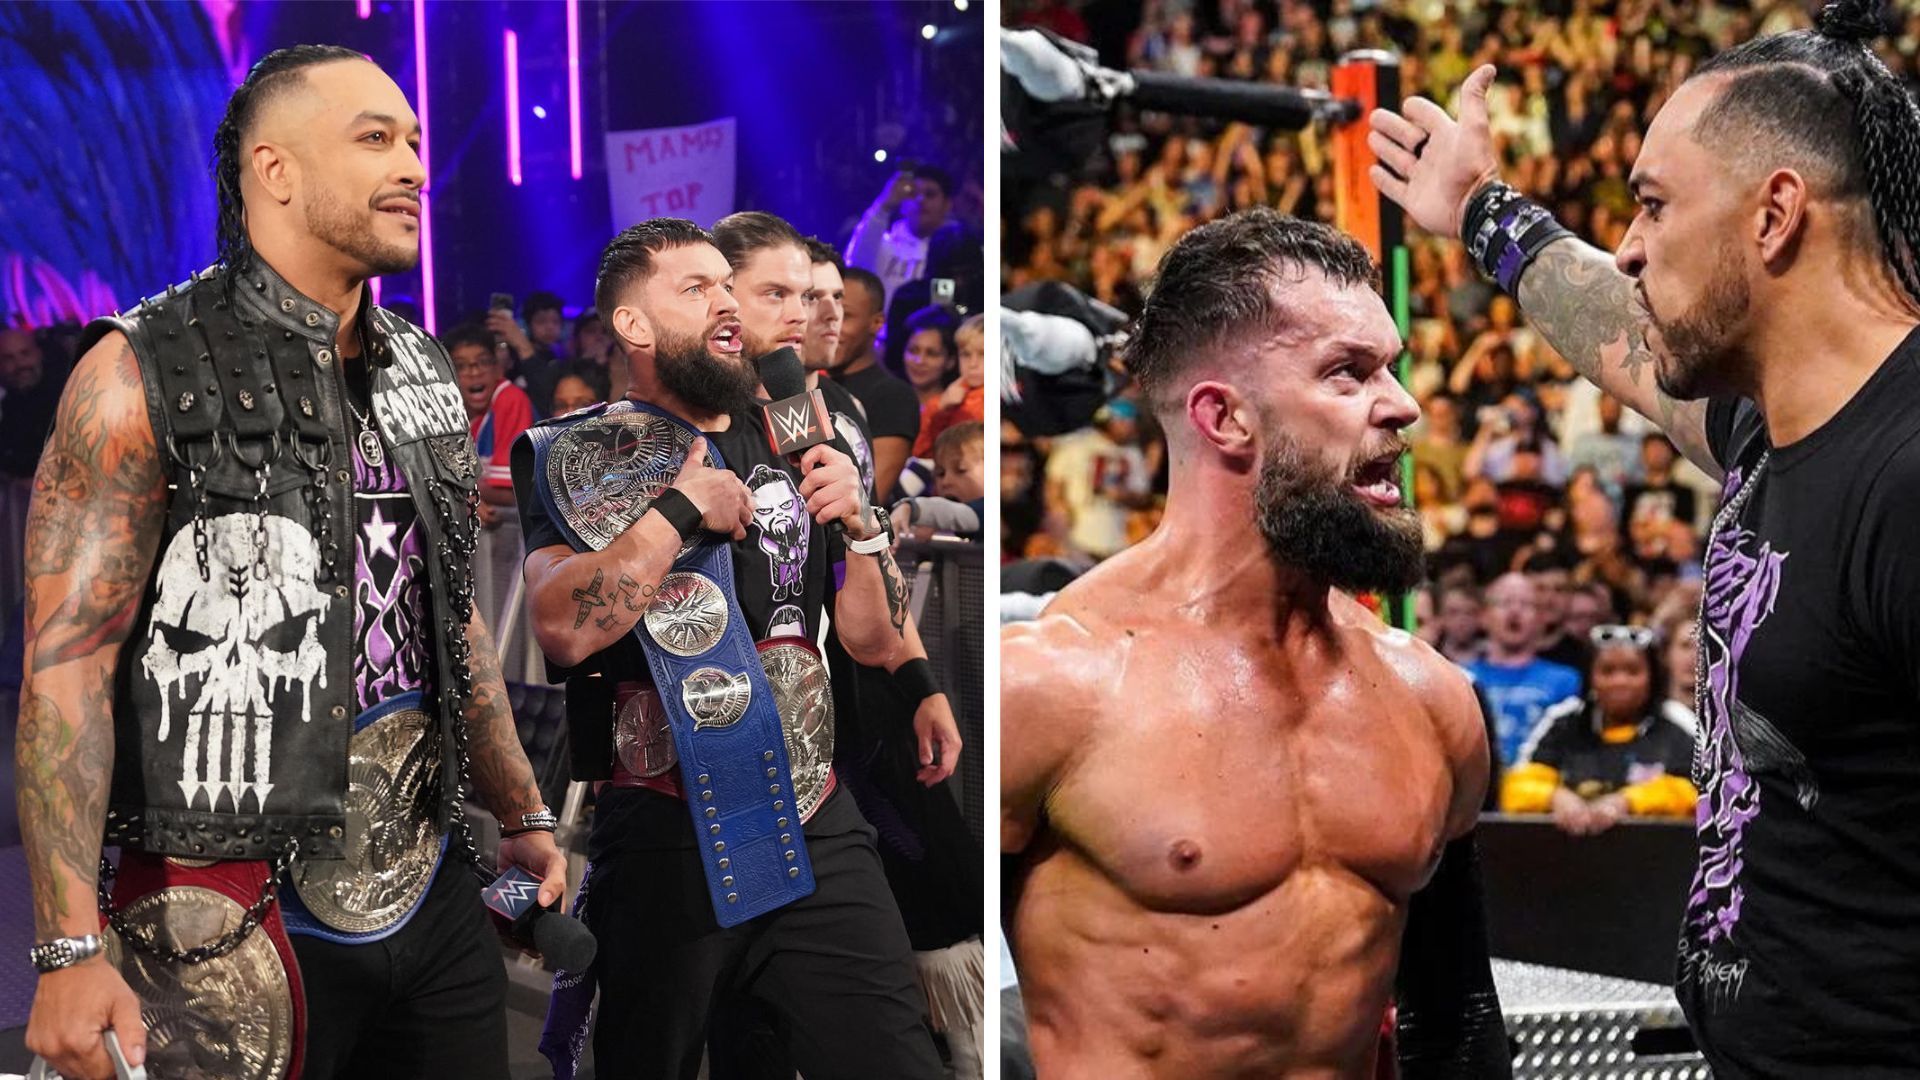 WWE Undisputed Tag Team titles could see a change of lineup before WrestleMania 40